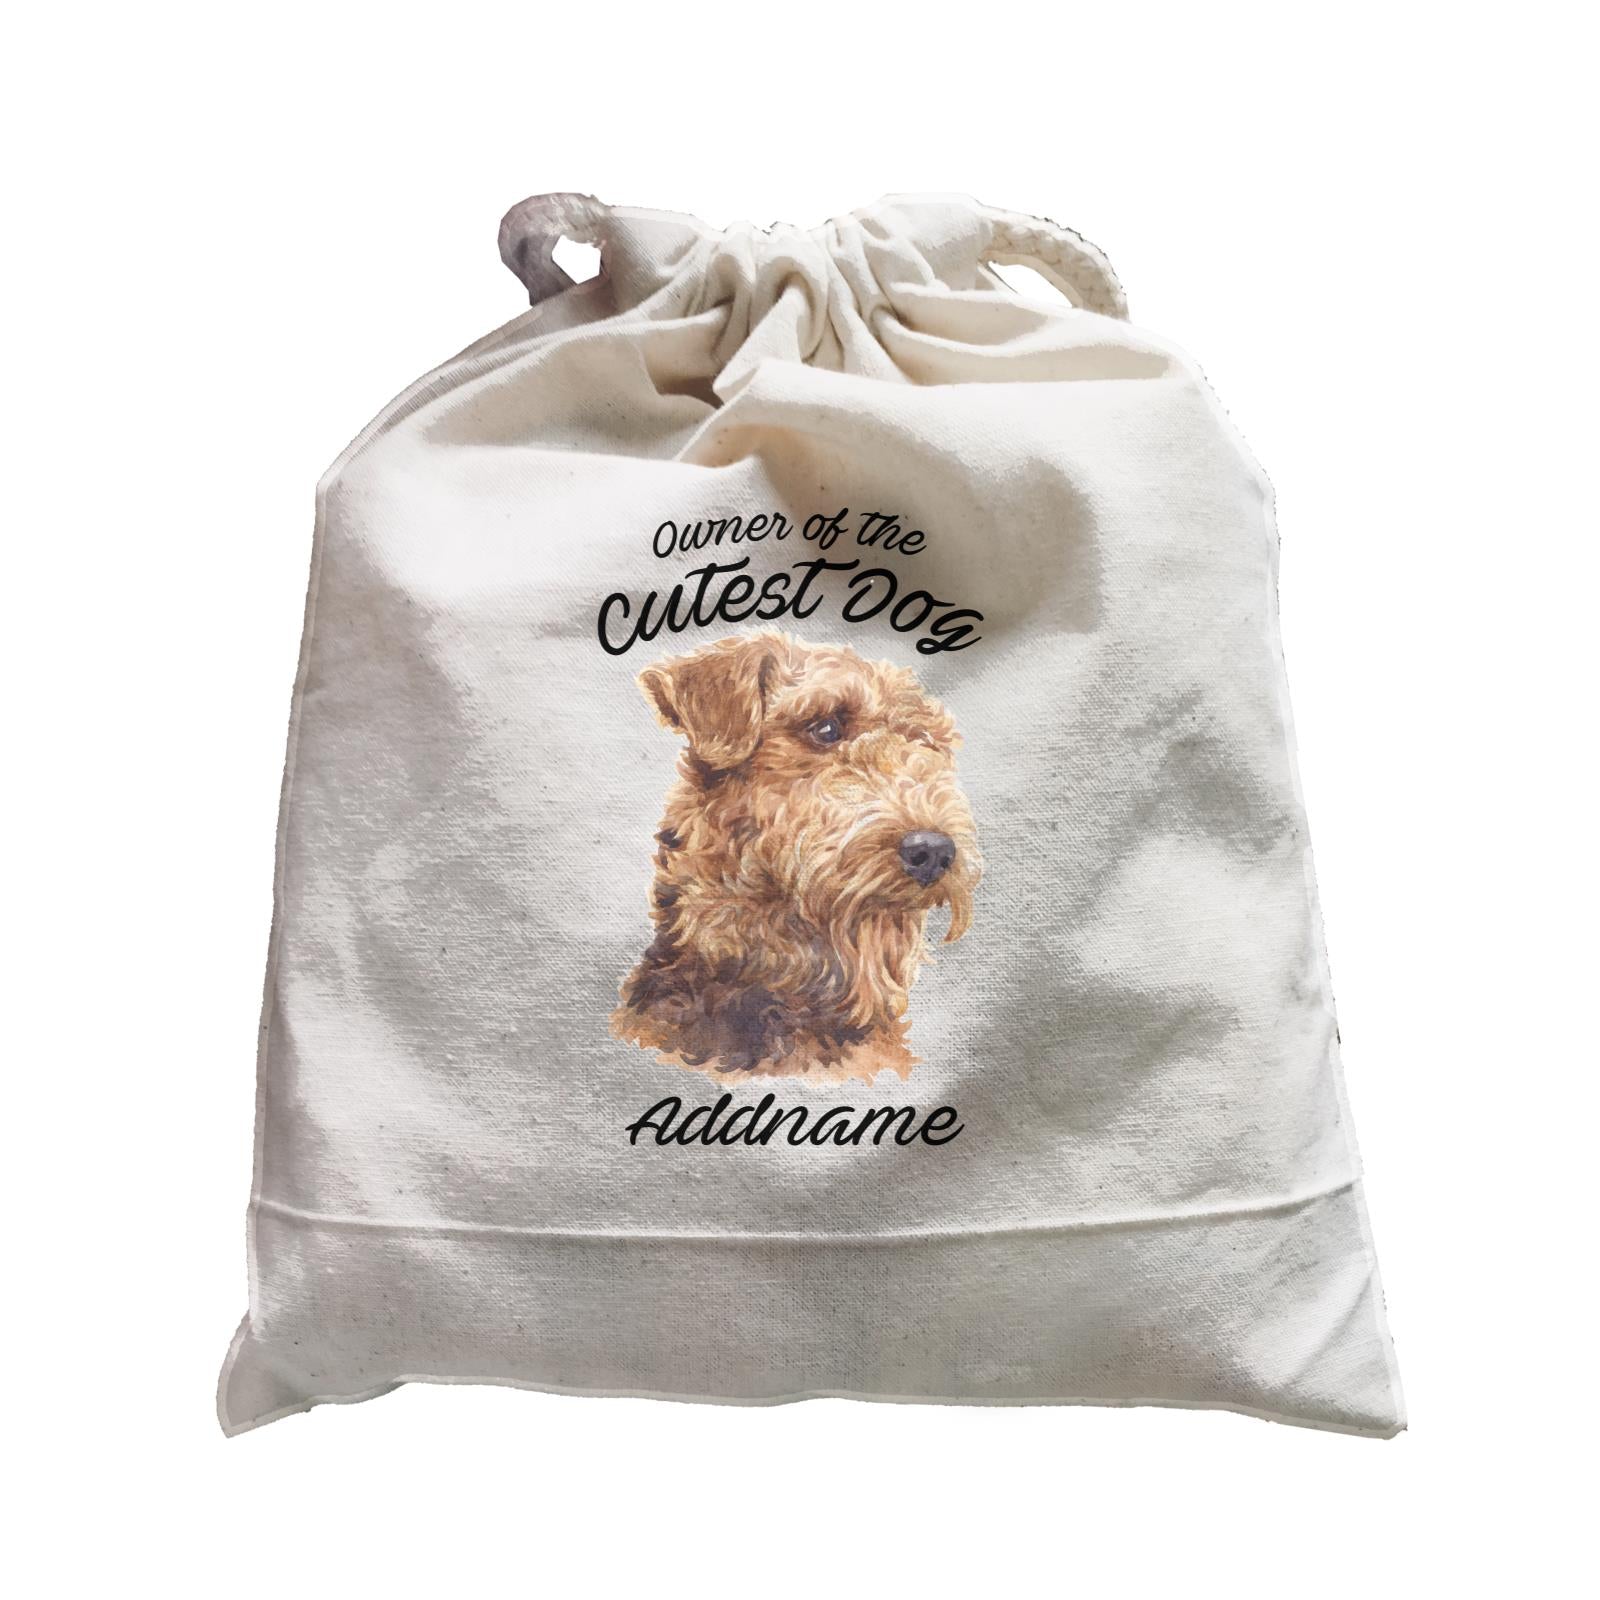 Watercolor Dog Owner Of The Cutest Dog Airedale Terrier Addname Satchel